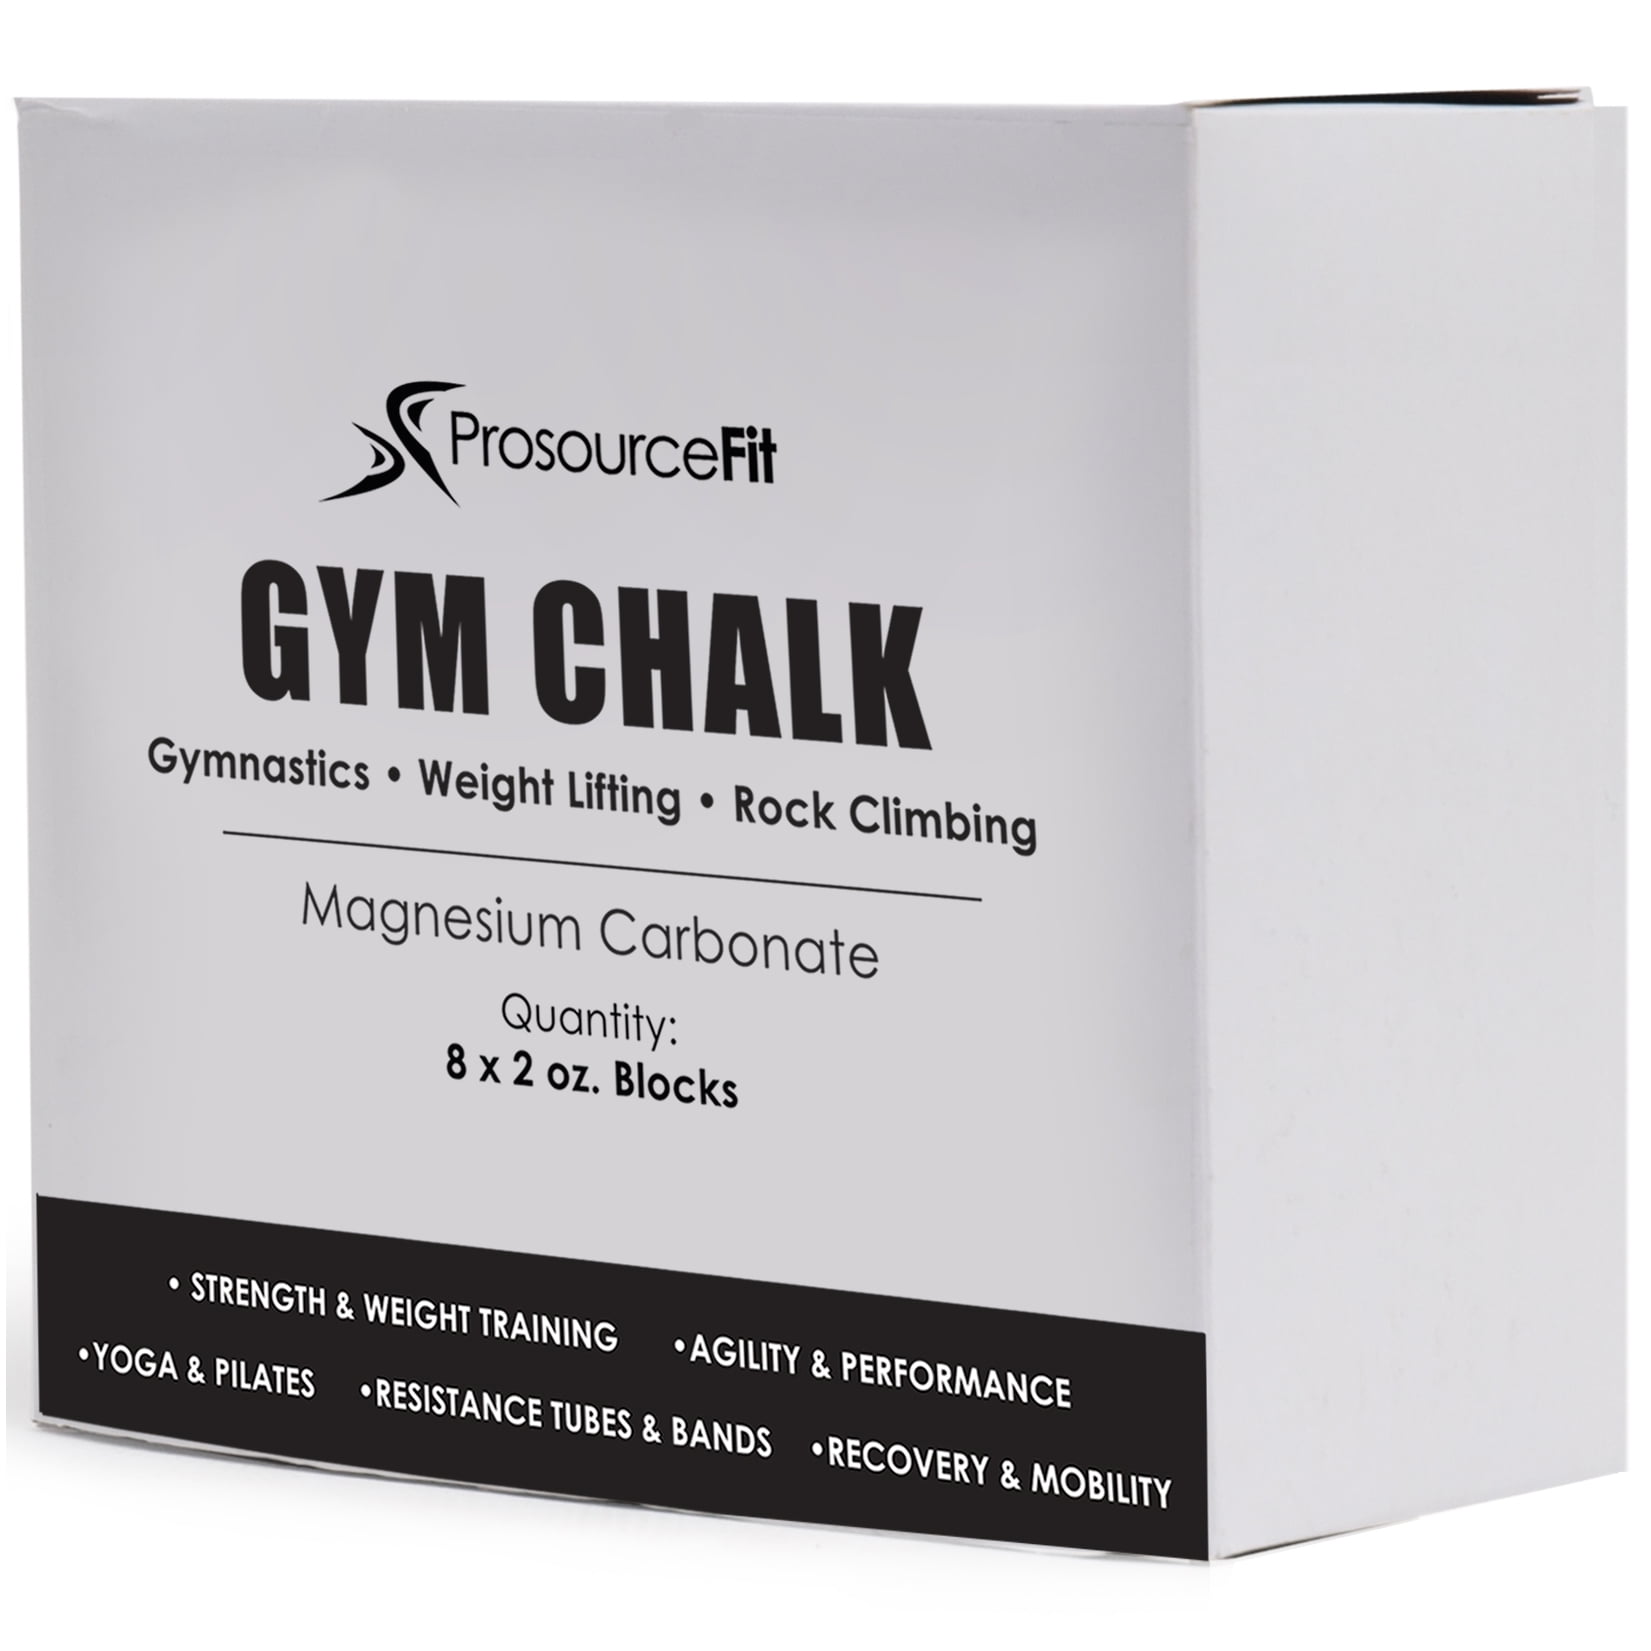 Weightlifting Great for Climbing Gymnastics Magnesium Carbonate Athletic Chalk Ball,Chalk Ball Training Pack of 3 60 Gram Premium Gym Chalk in Refillable Sock NonToxic Pool 